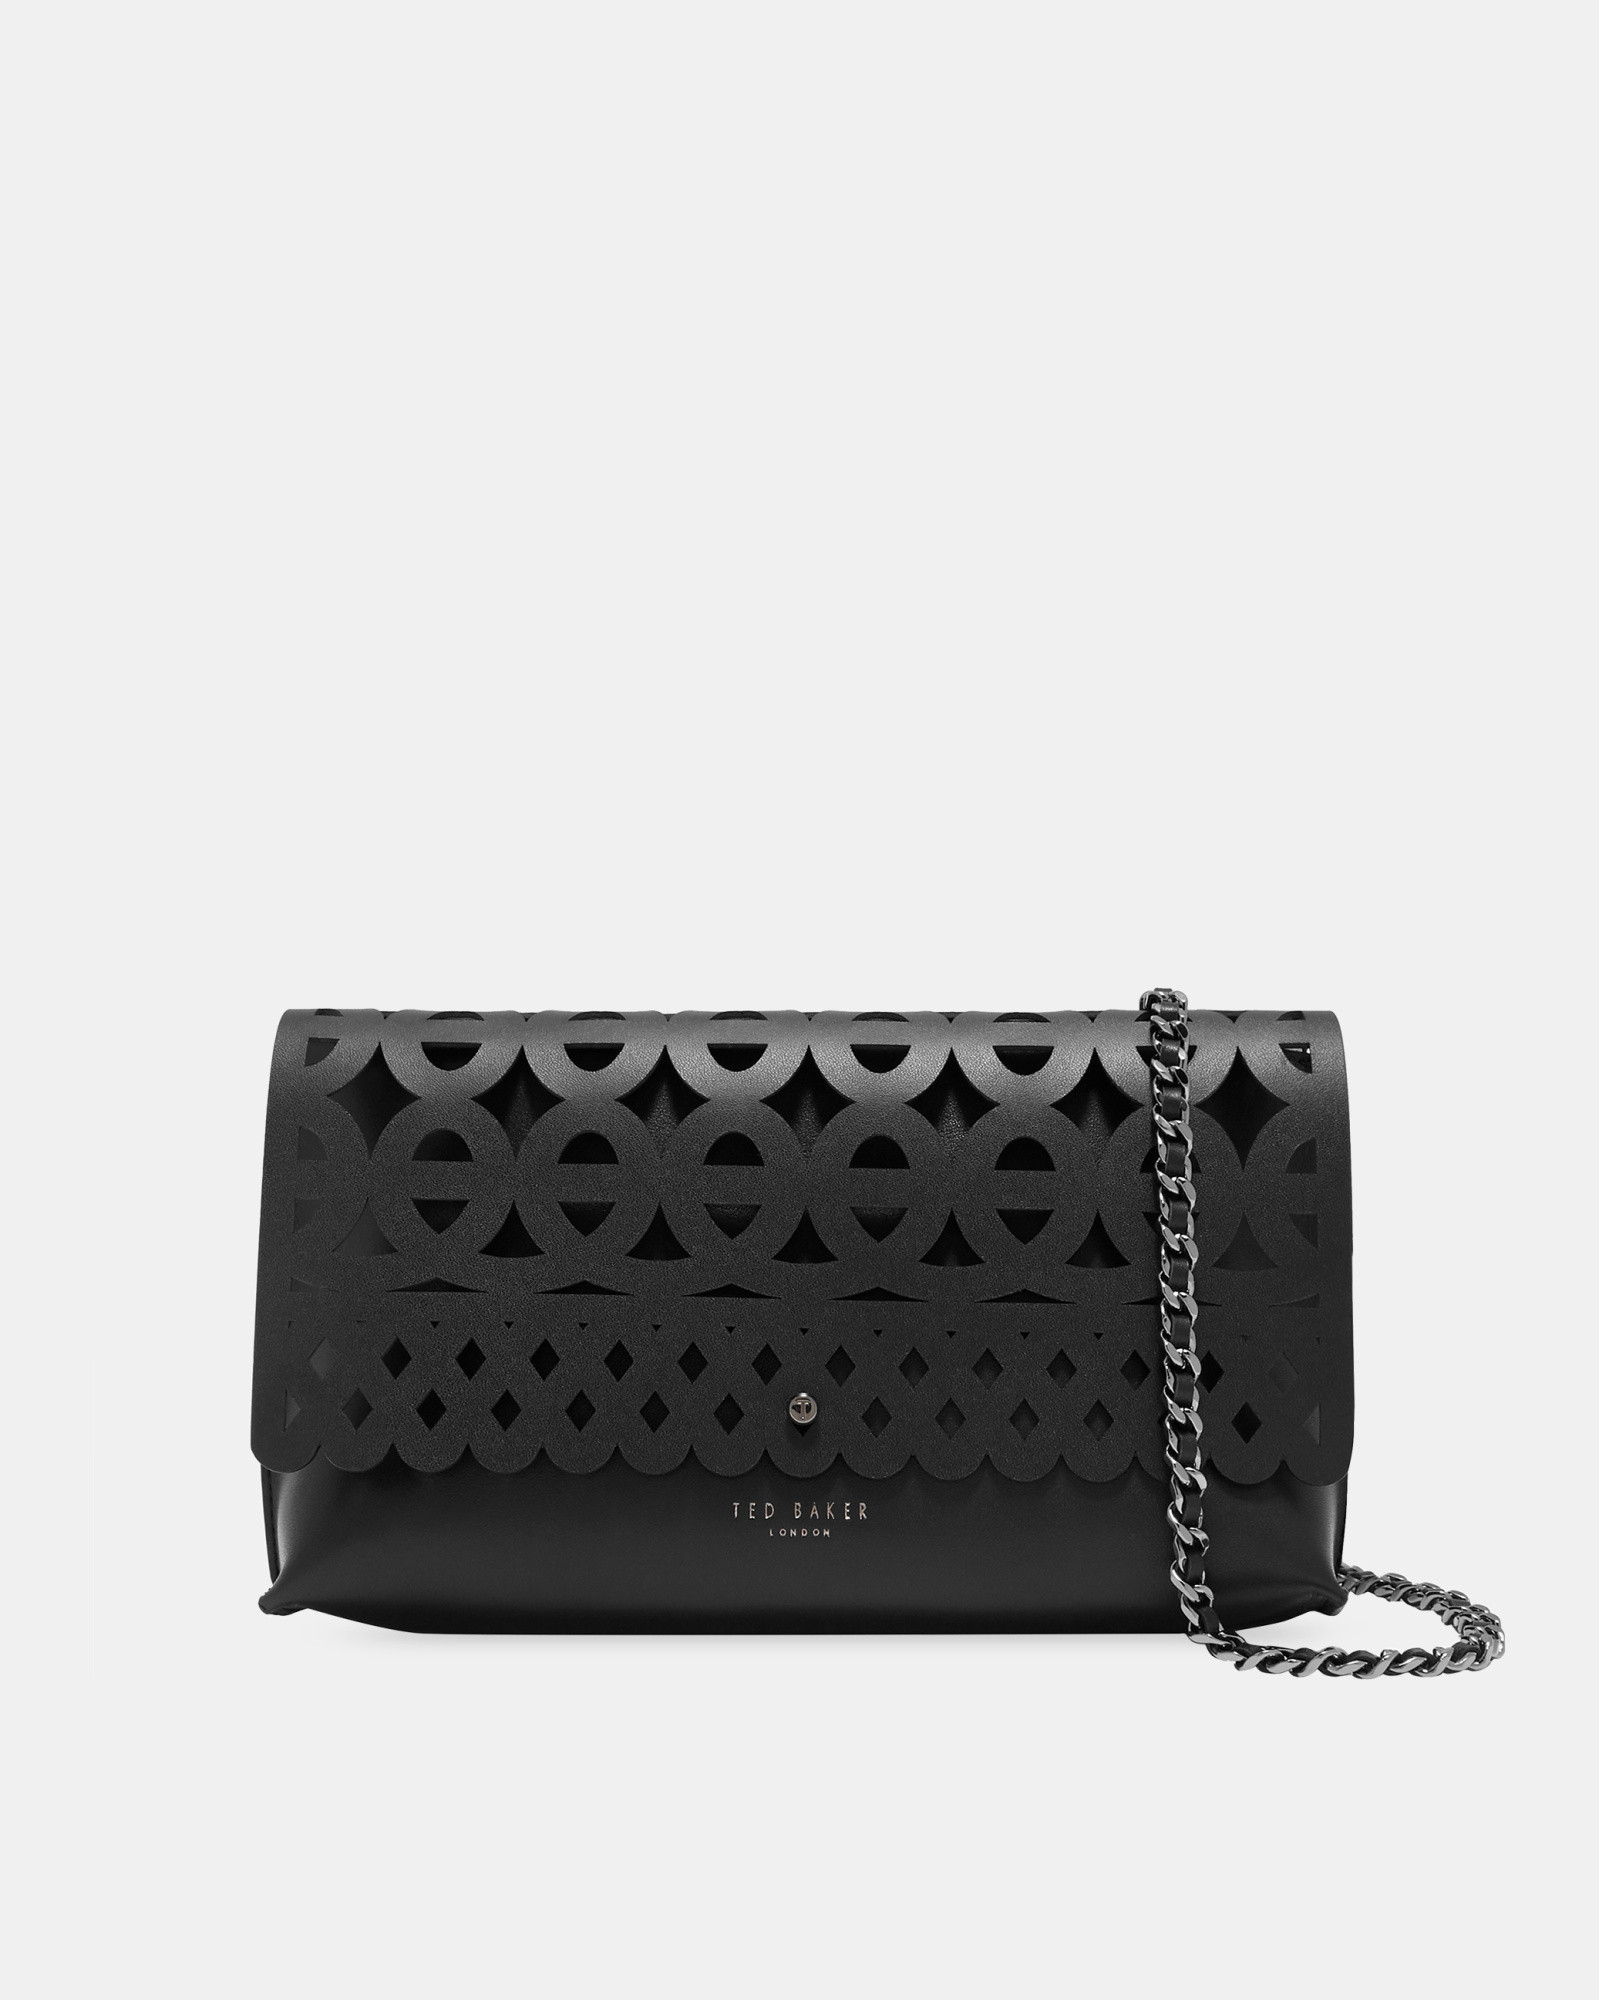 SALLIA Cut out detail leather clutch